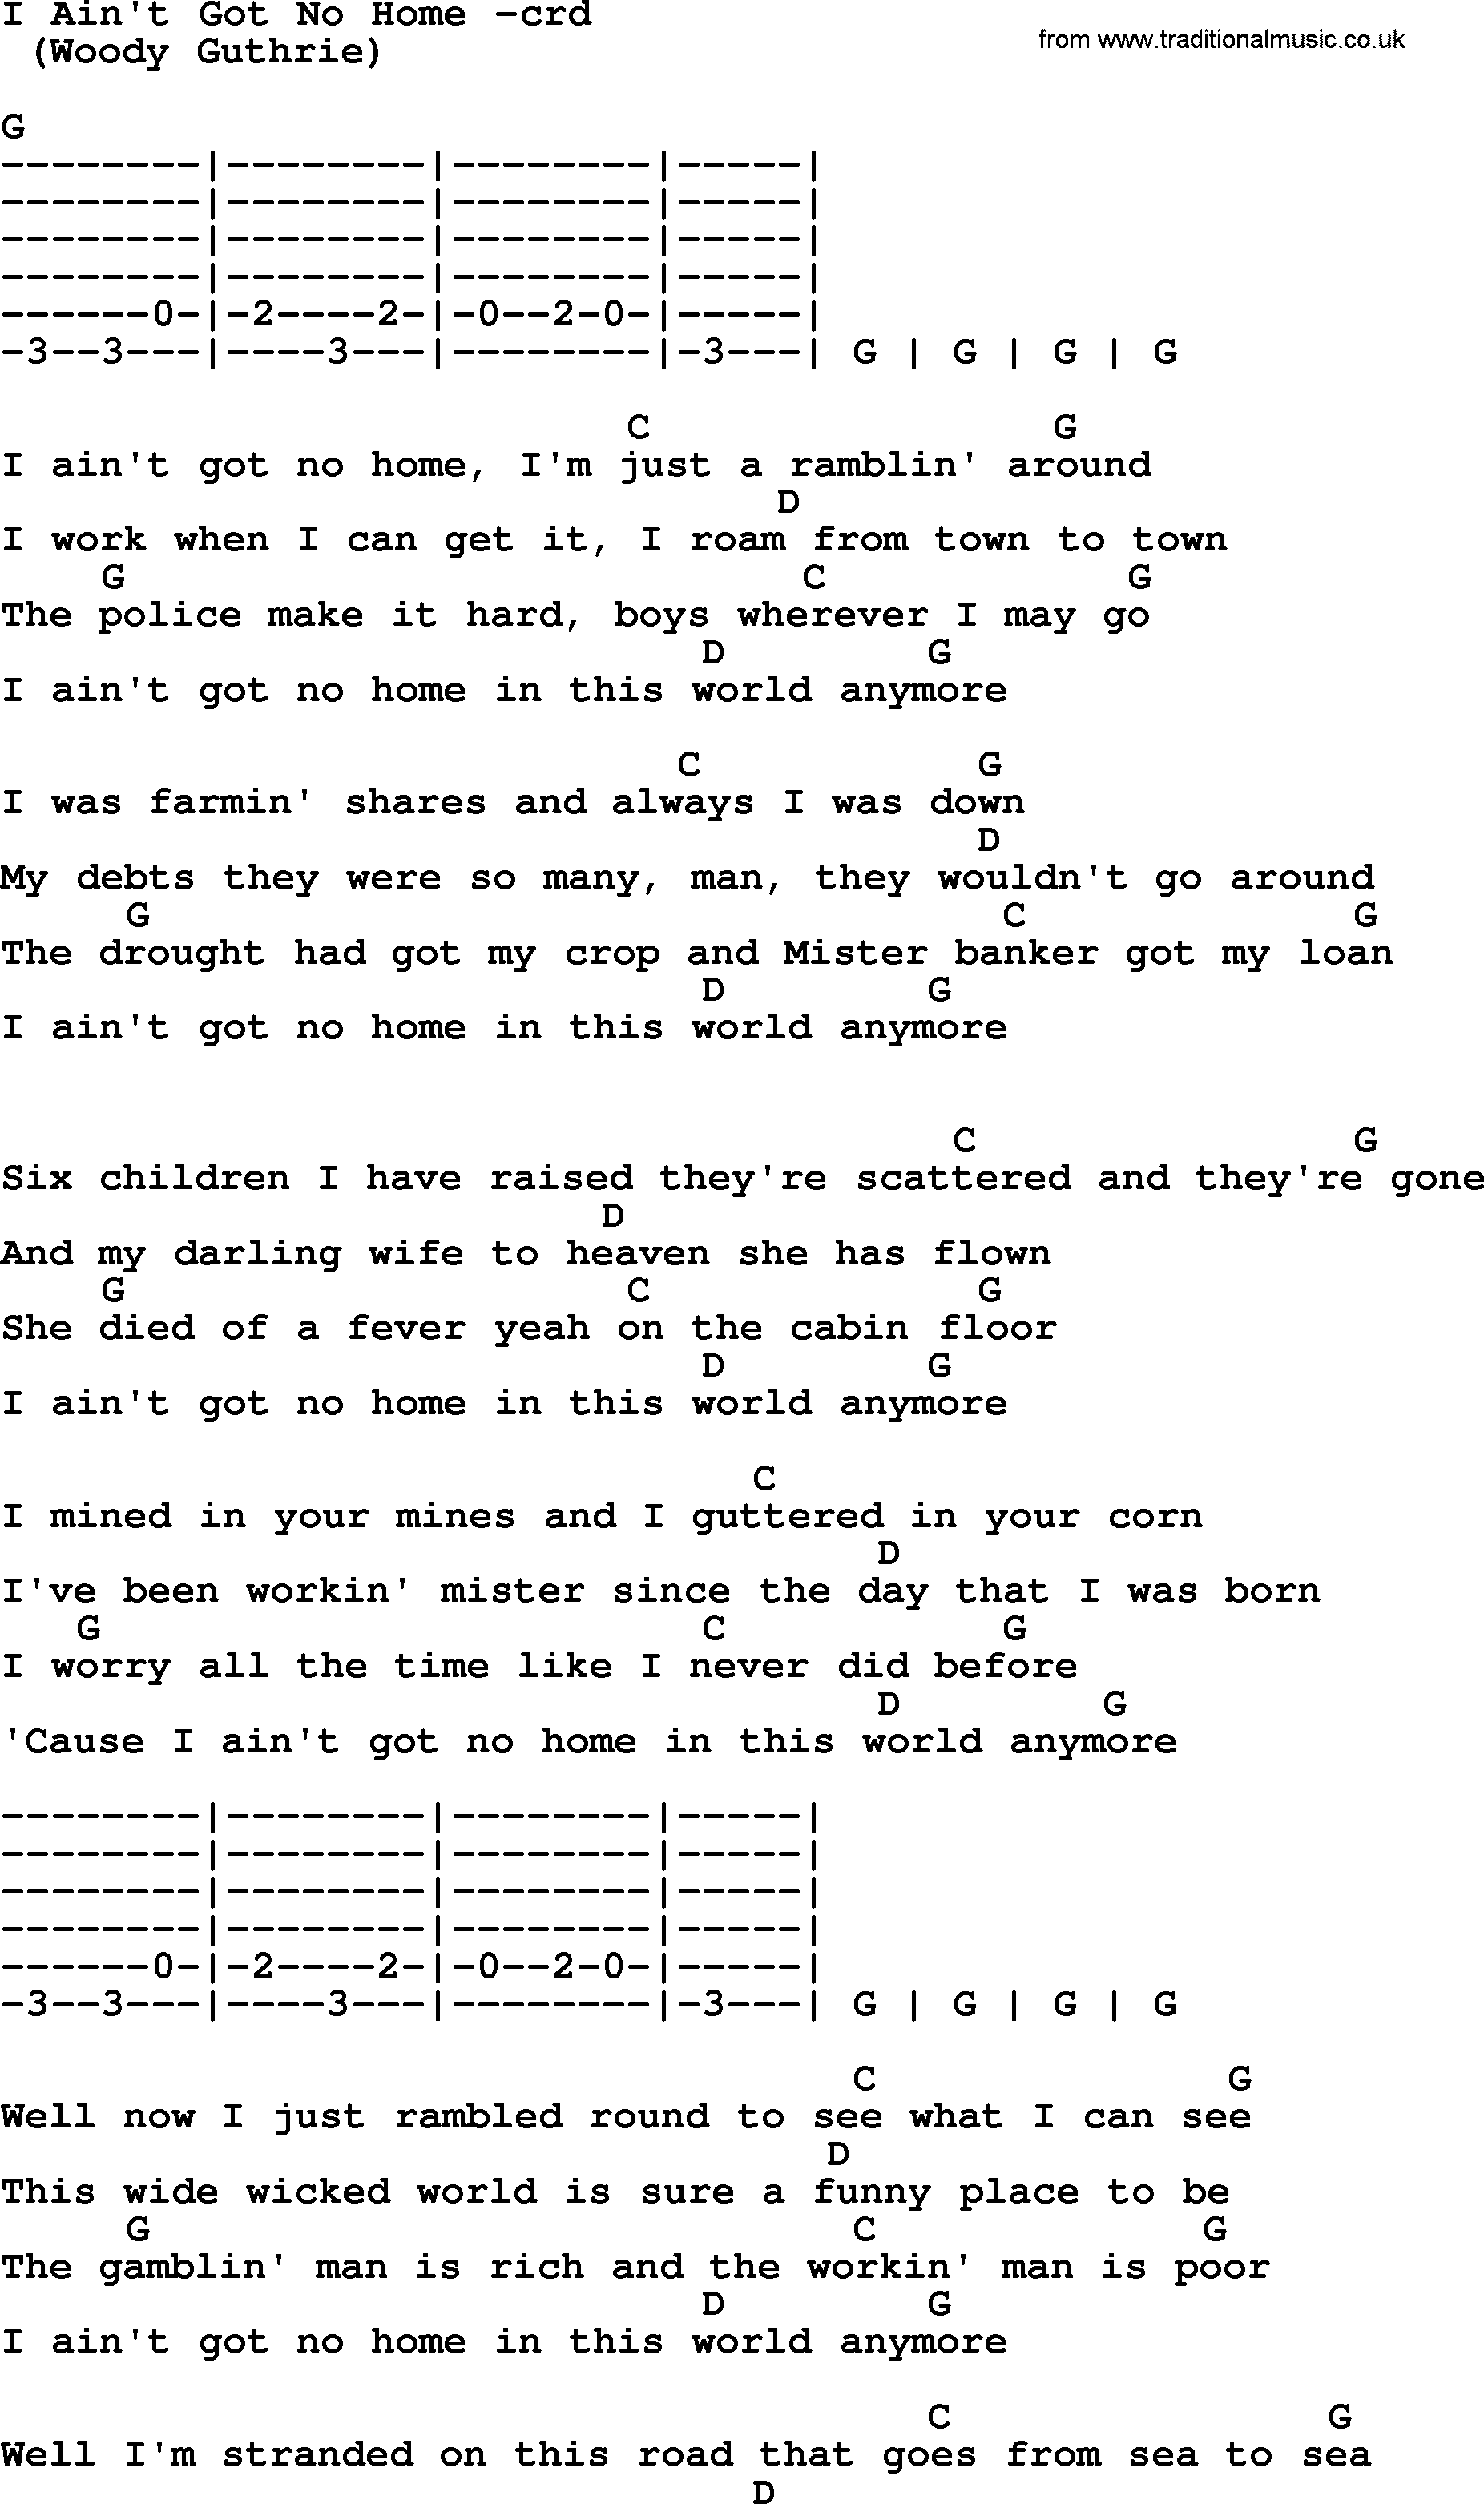 Bruce Springsteen song: I Ain't Got No Home , lyrics and chords